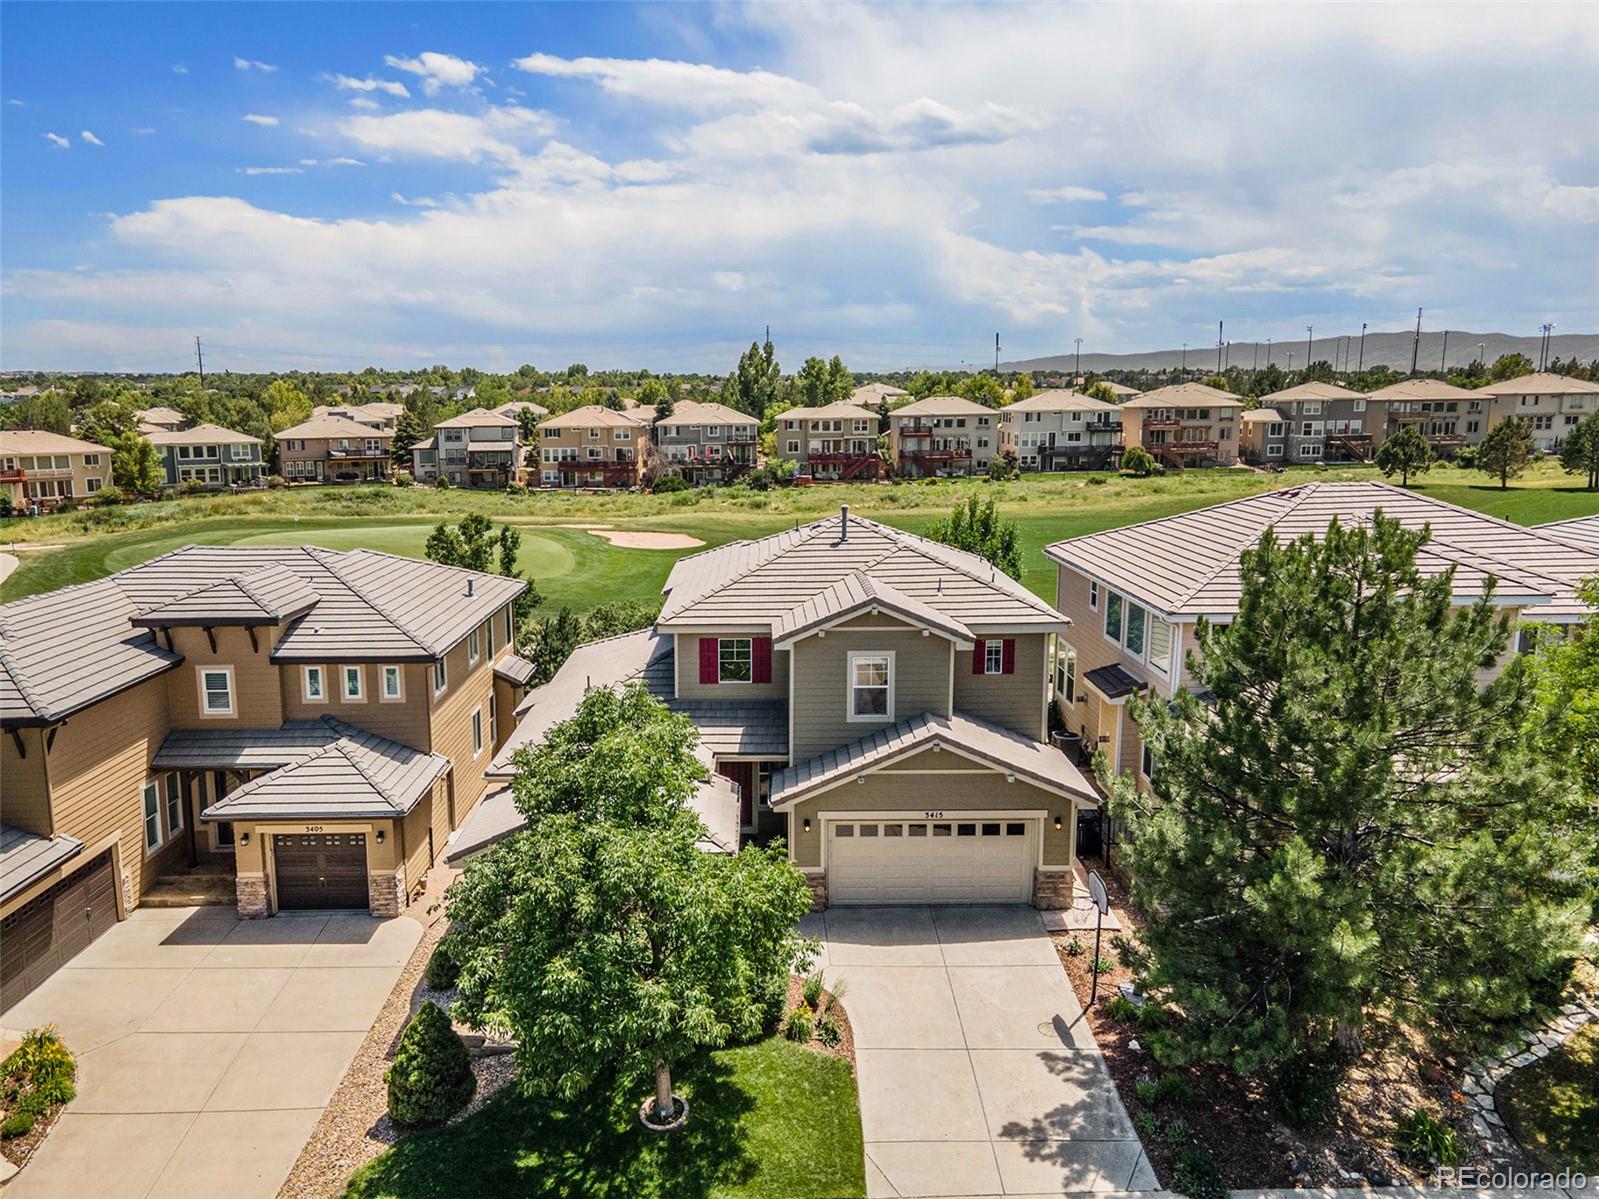 3415  westbrook lane, highlands ranch sold home. Closed on 2024-04-26 for $950,000.